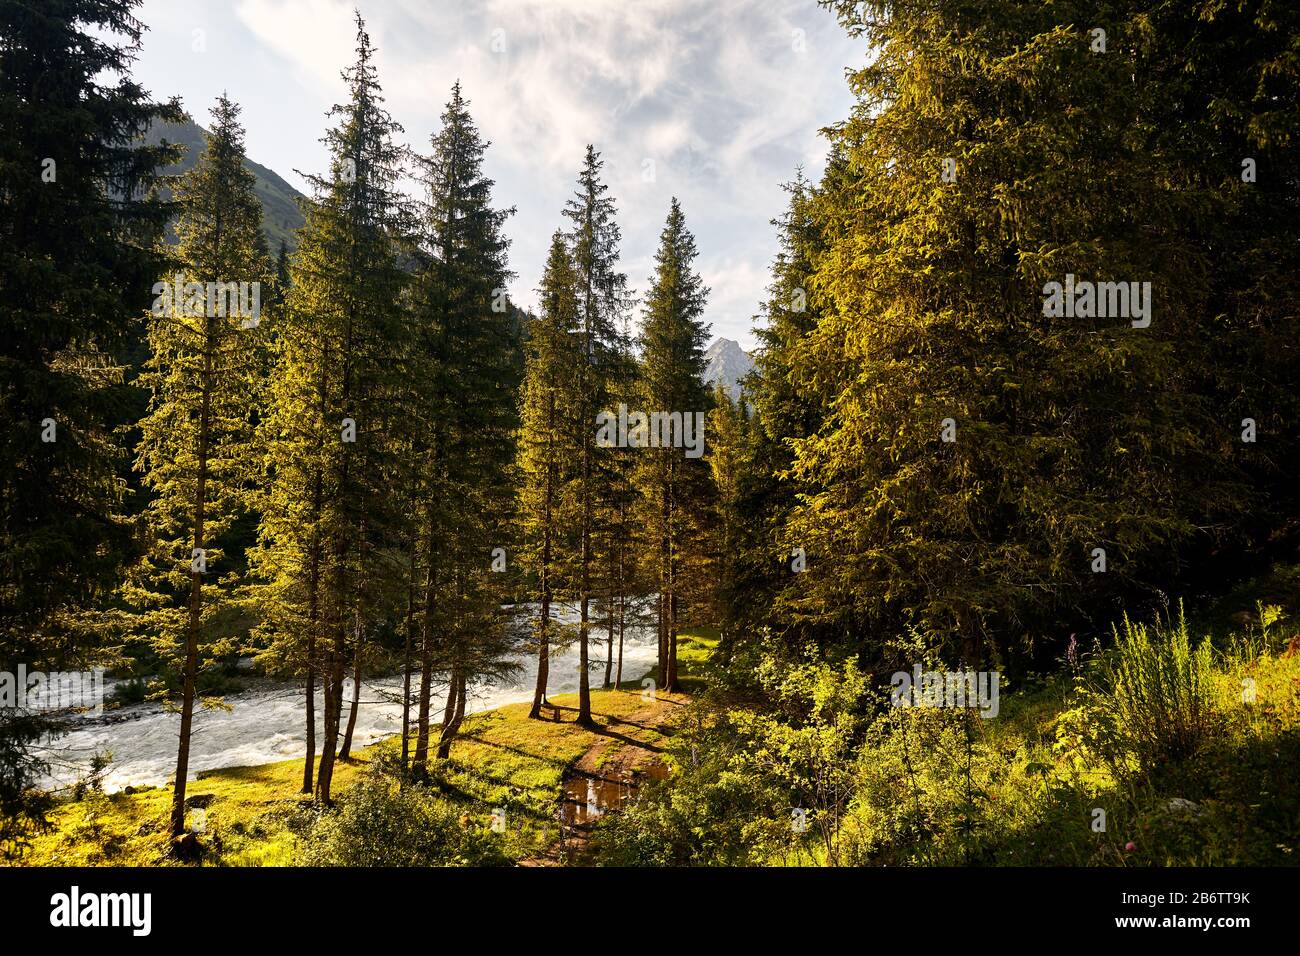 Landscape of river and mountain valley with spruce trees and snowy peak at background in Karakol national park, Kyrgyzstan Stock Photo